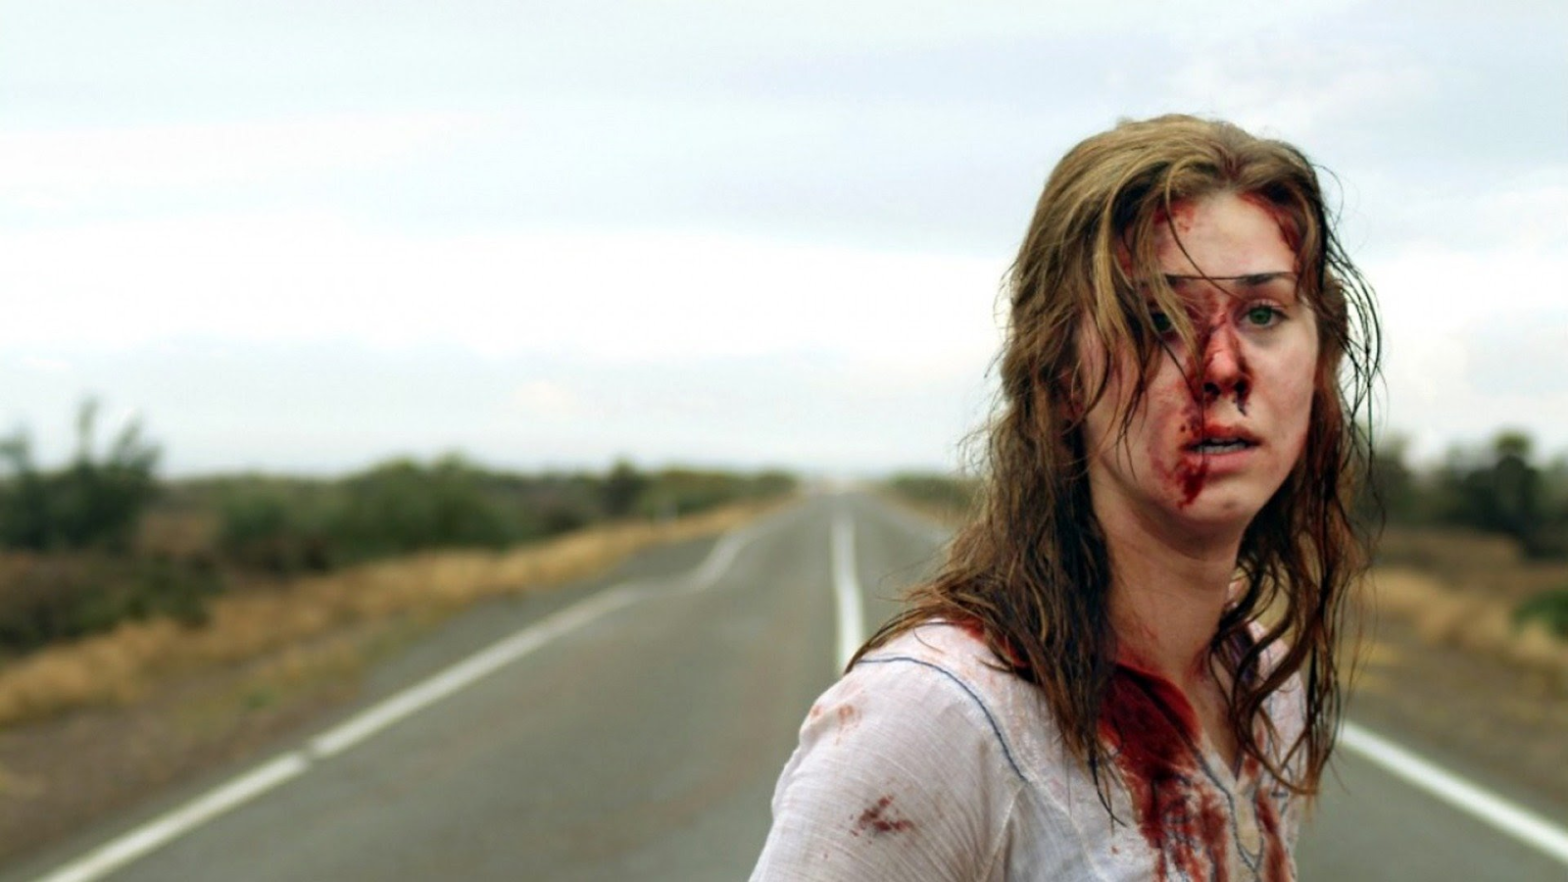 A still from the movie Wolf Creek